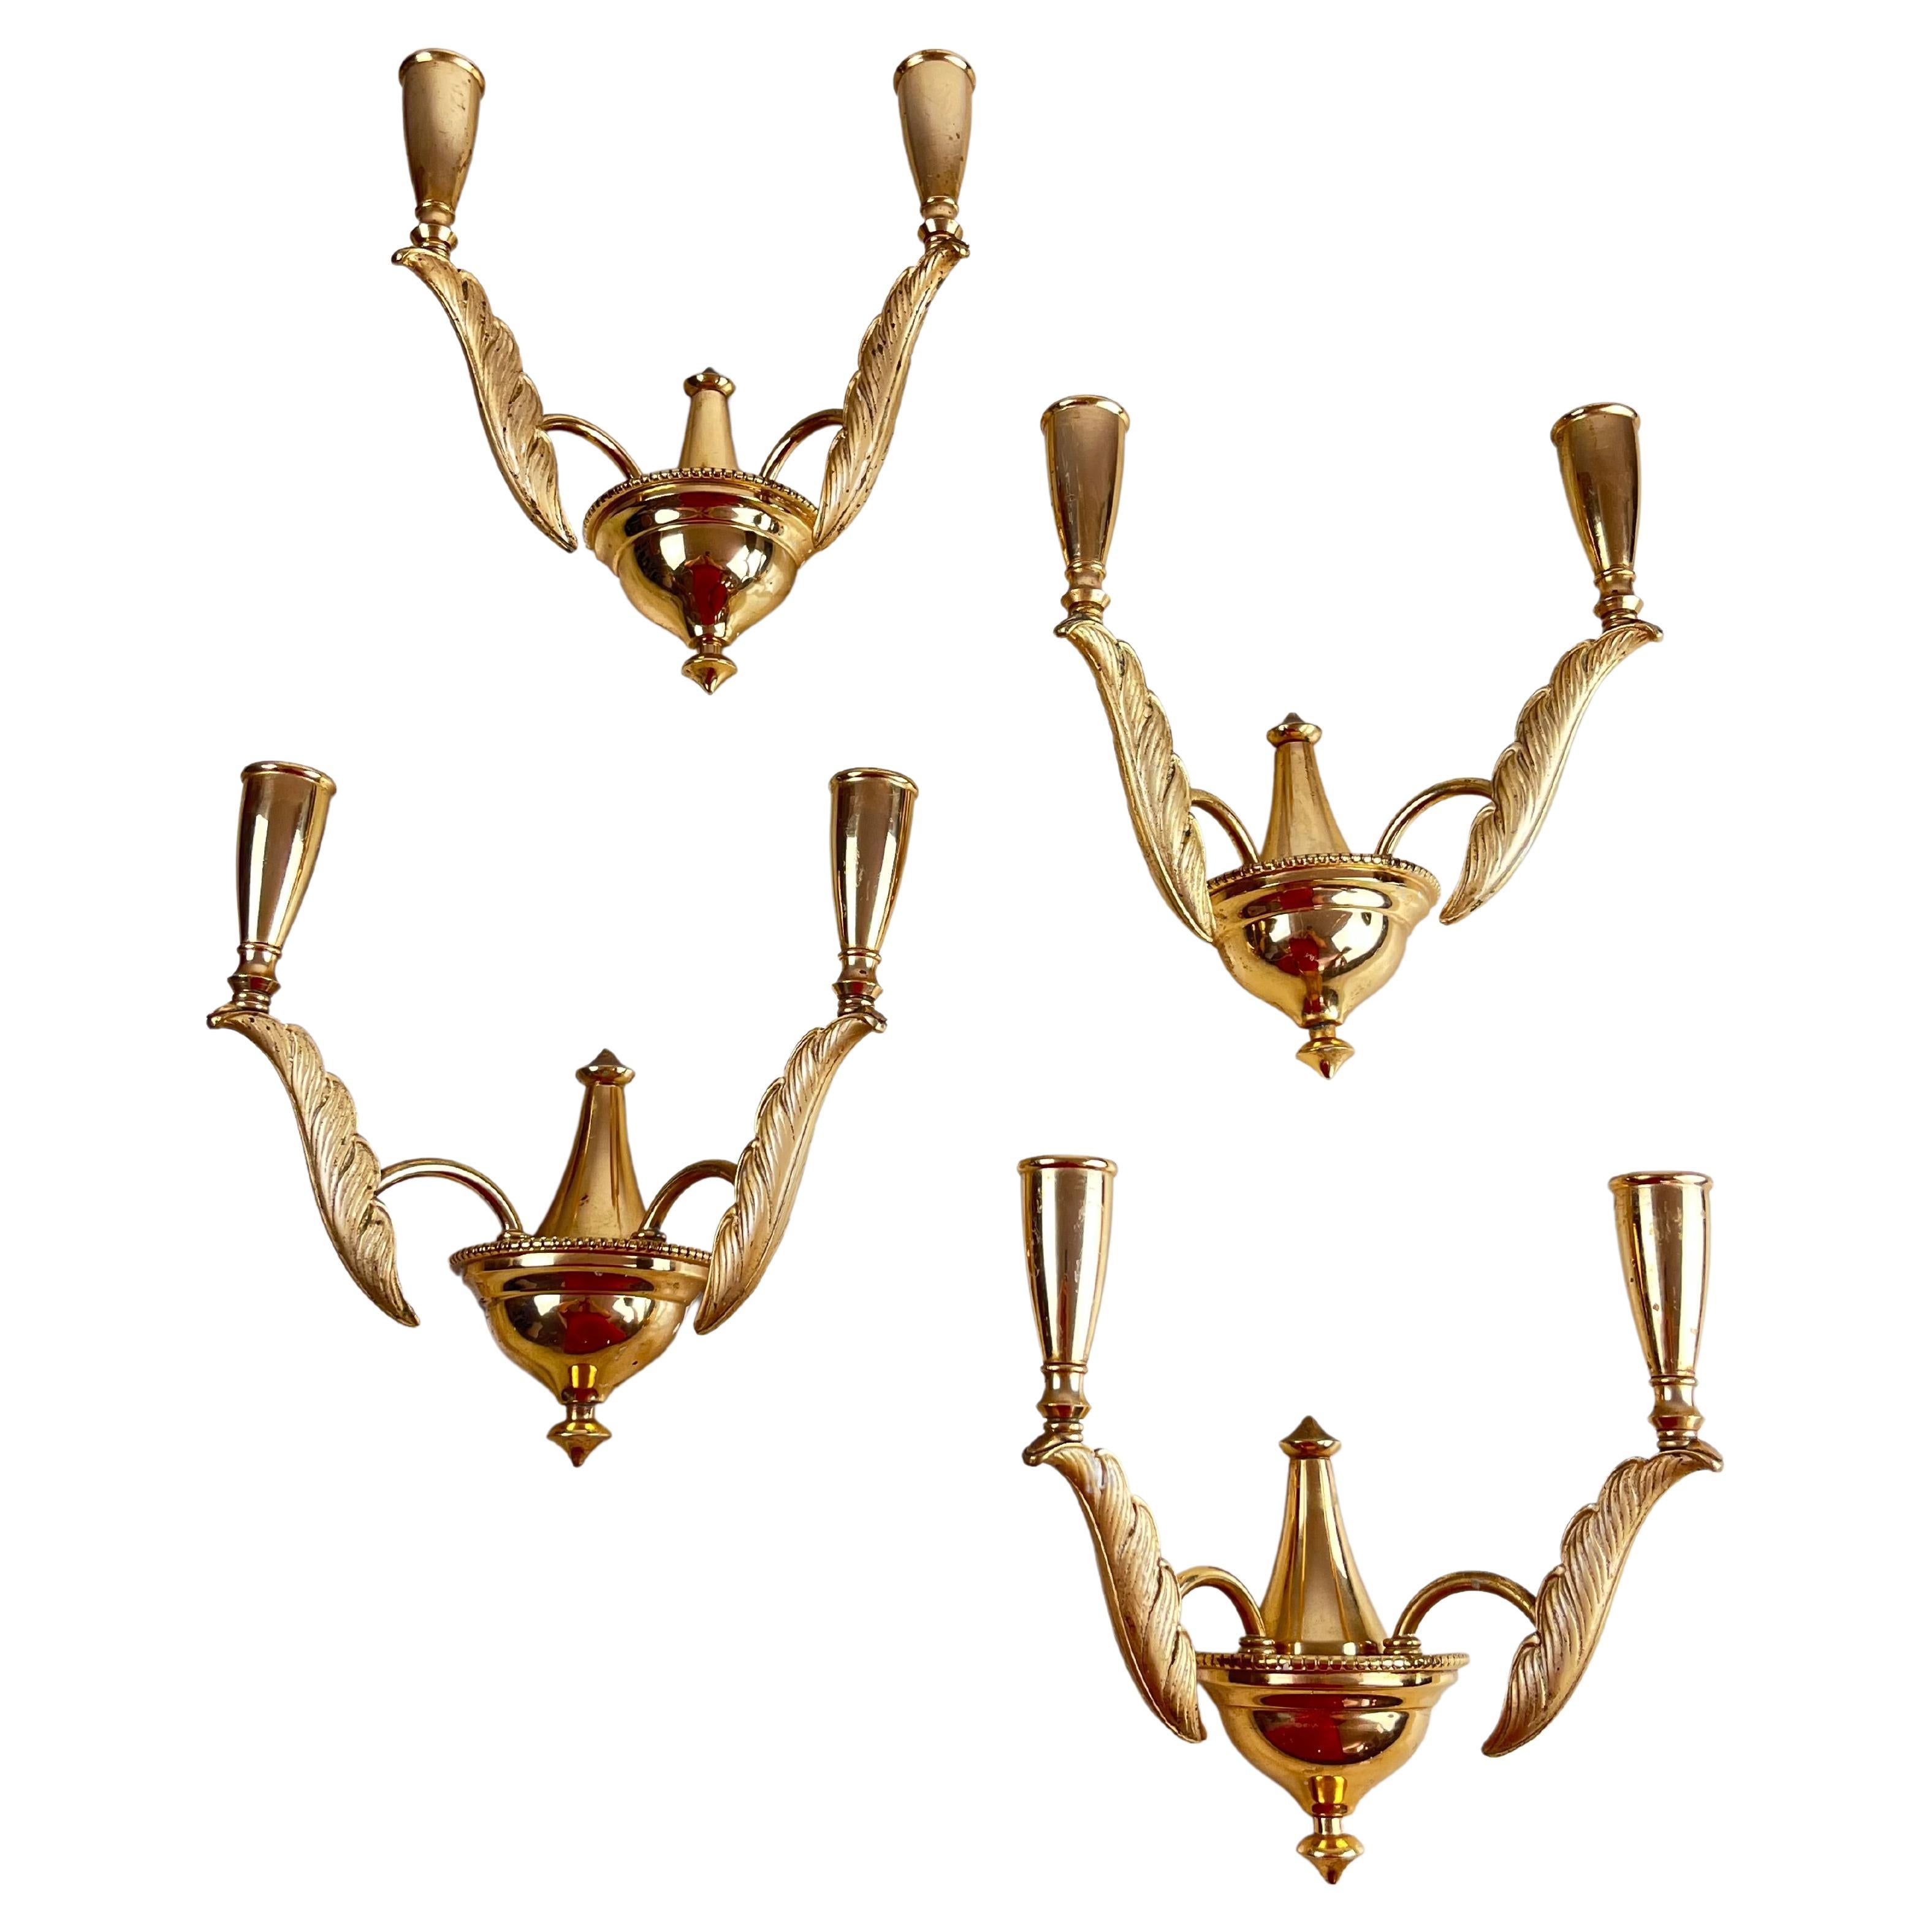 Set of 4 Mid-Century Brass Wall Lamp Sconces, Italy, 1960s